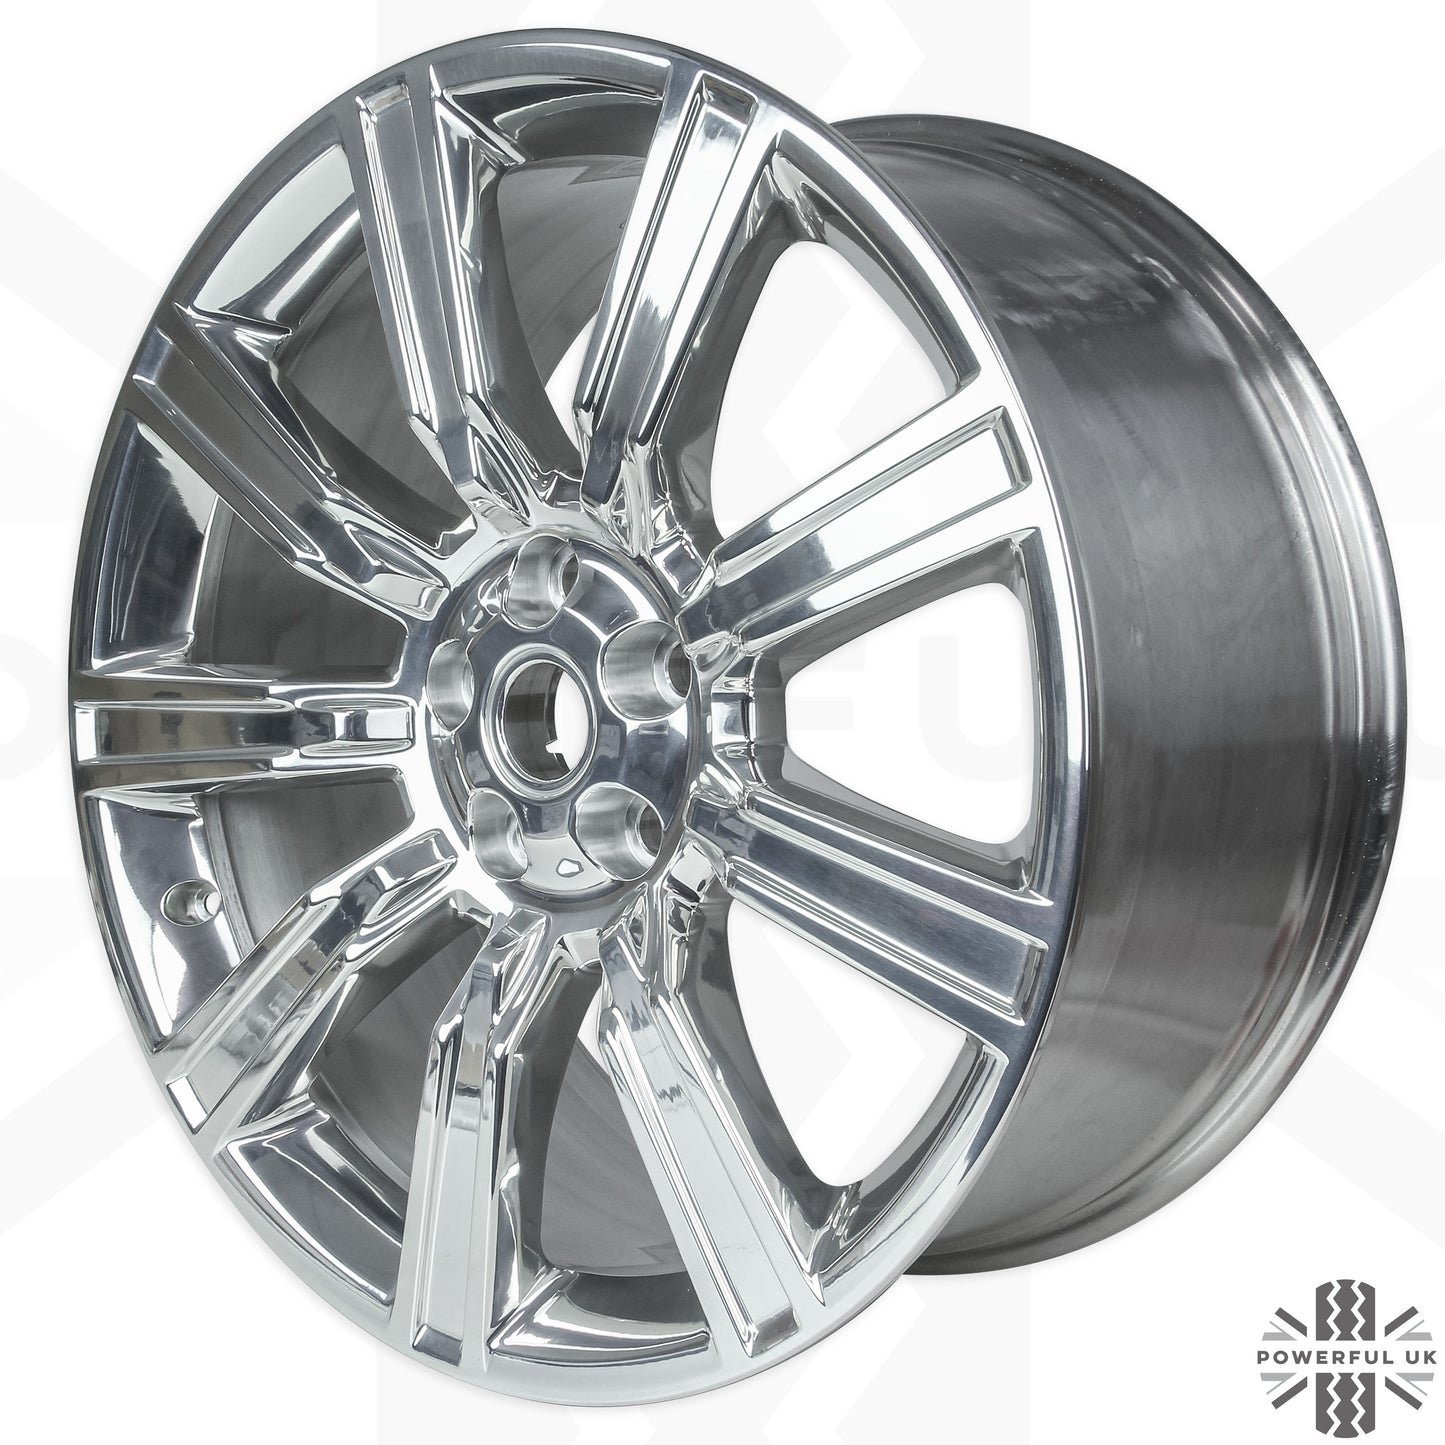 21" Forged Machine Polished Alloy Wheels - Set of 4 for Range Rover L405 Genuine